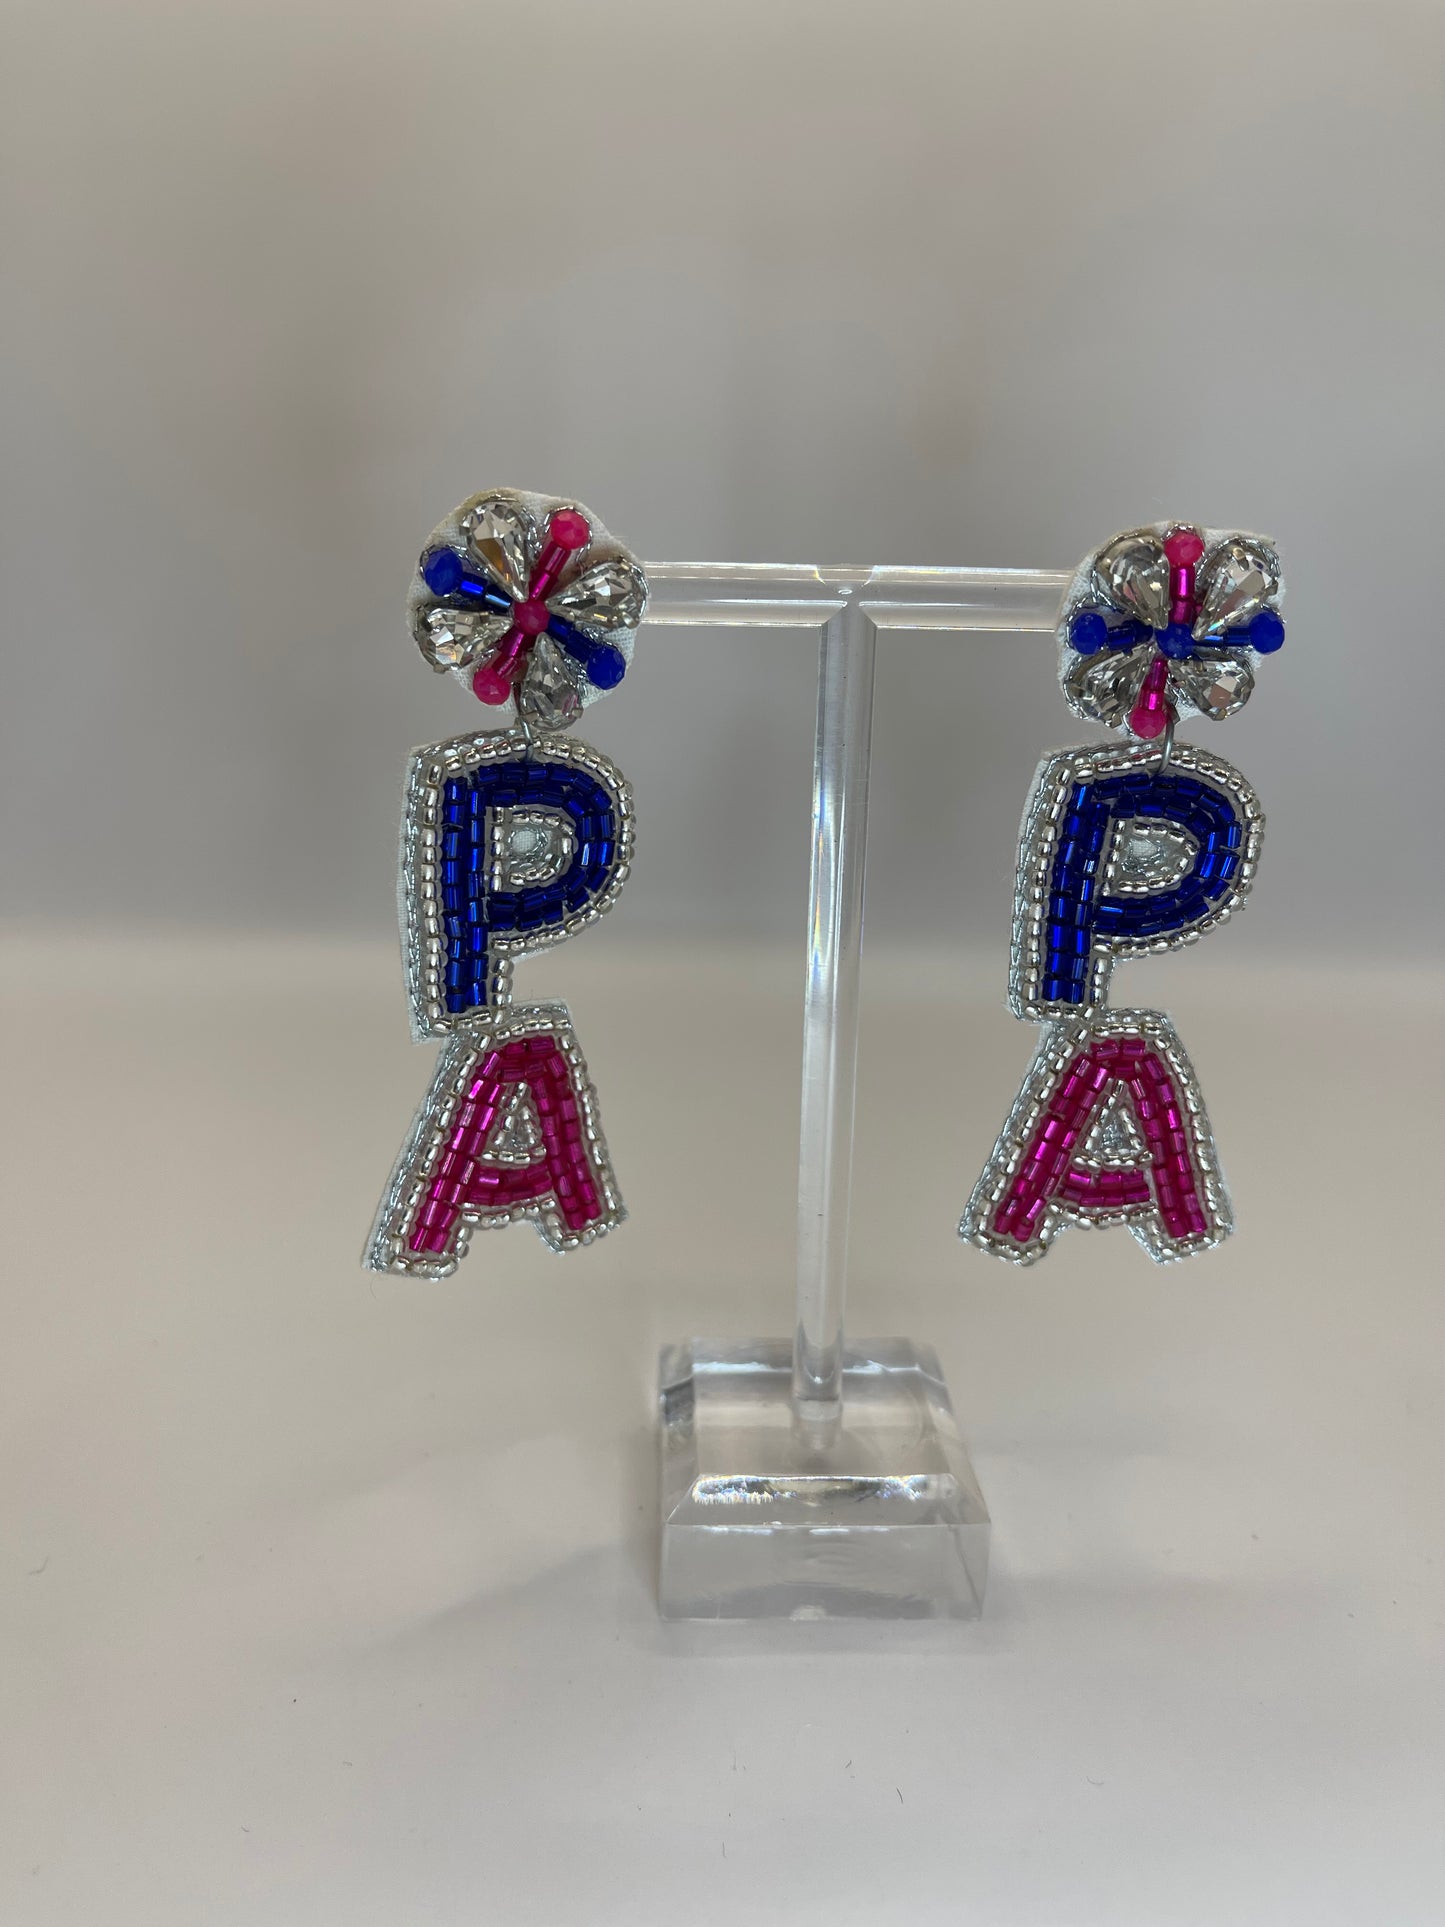 PA Physician’s Assistant Beaded Earrings